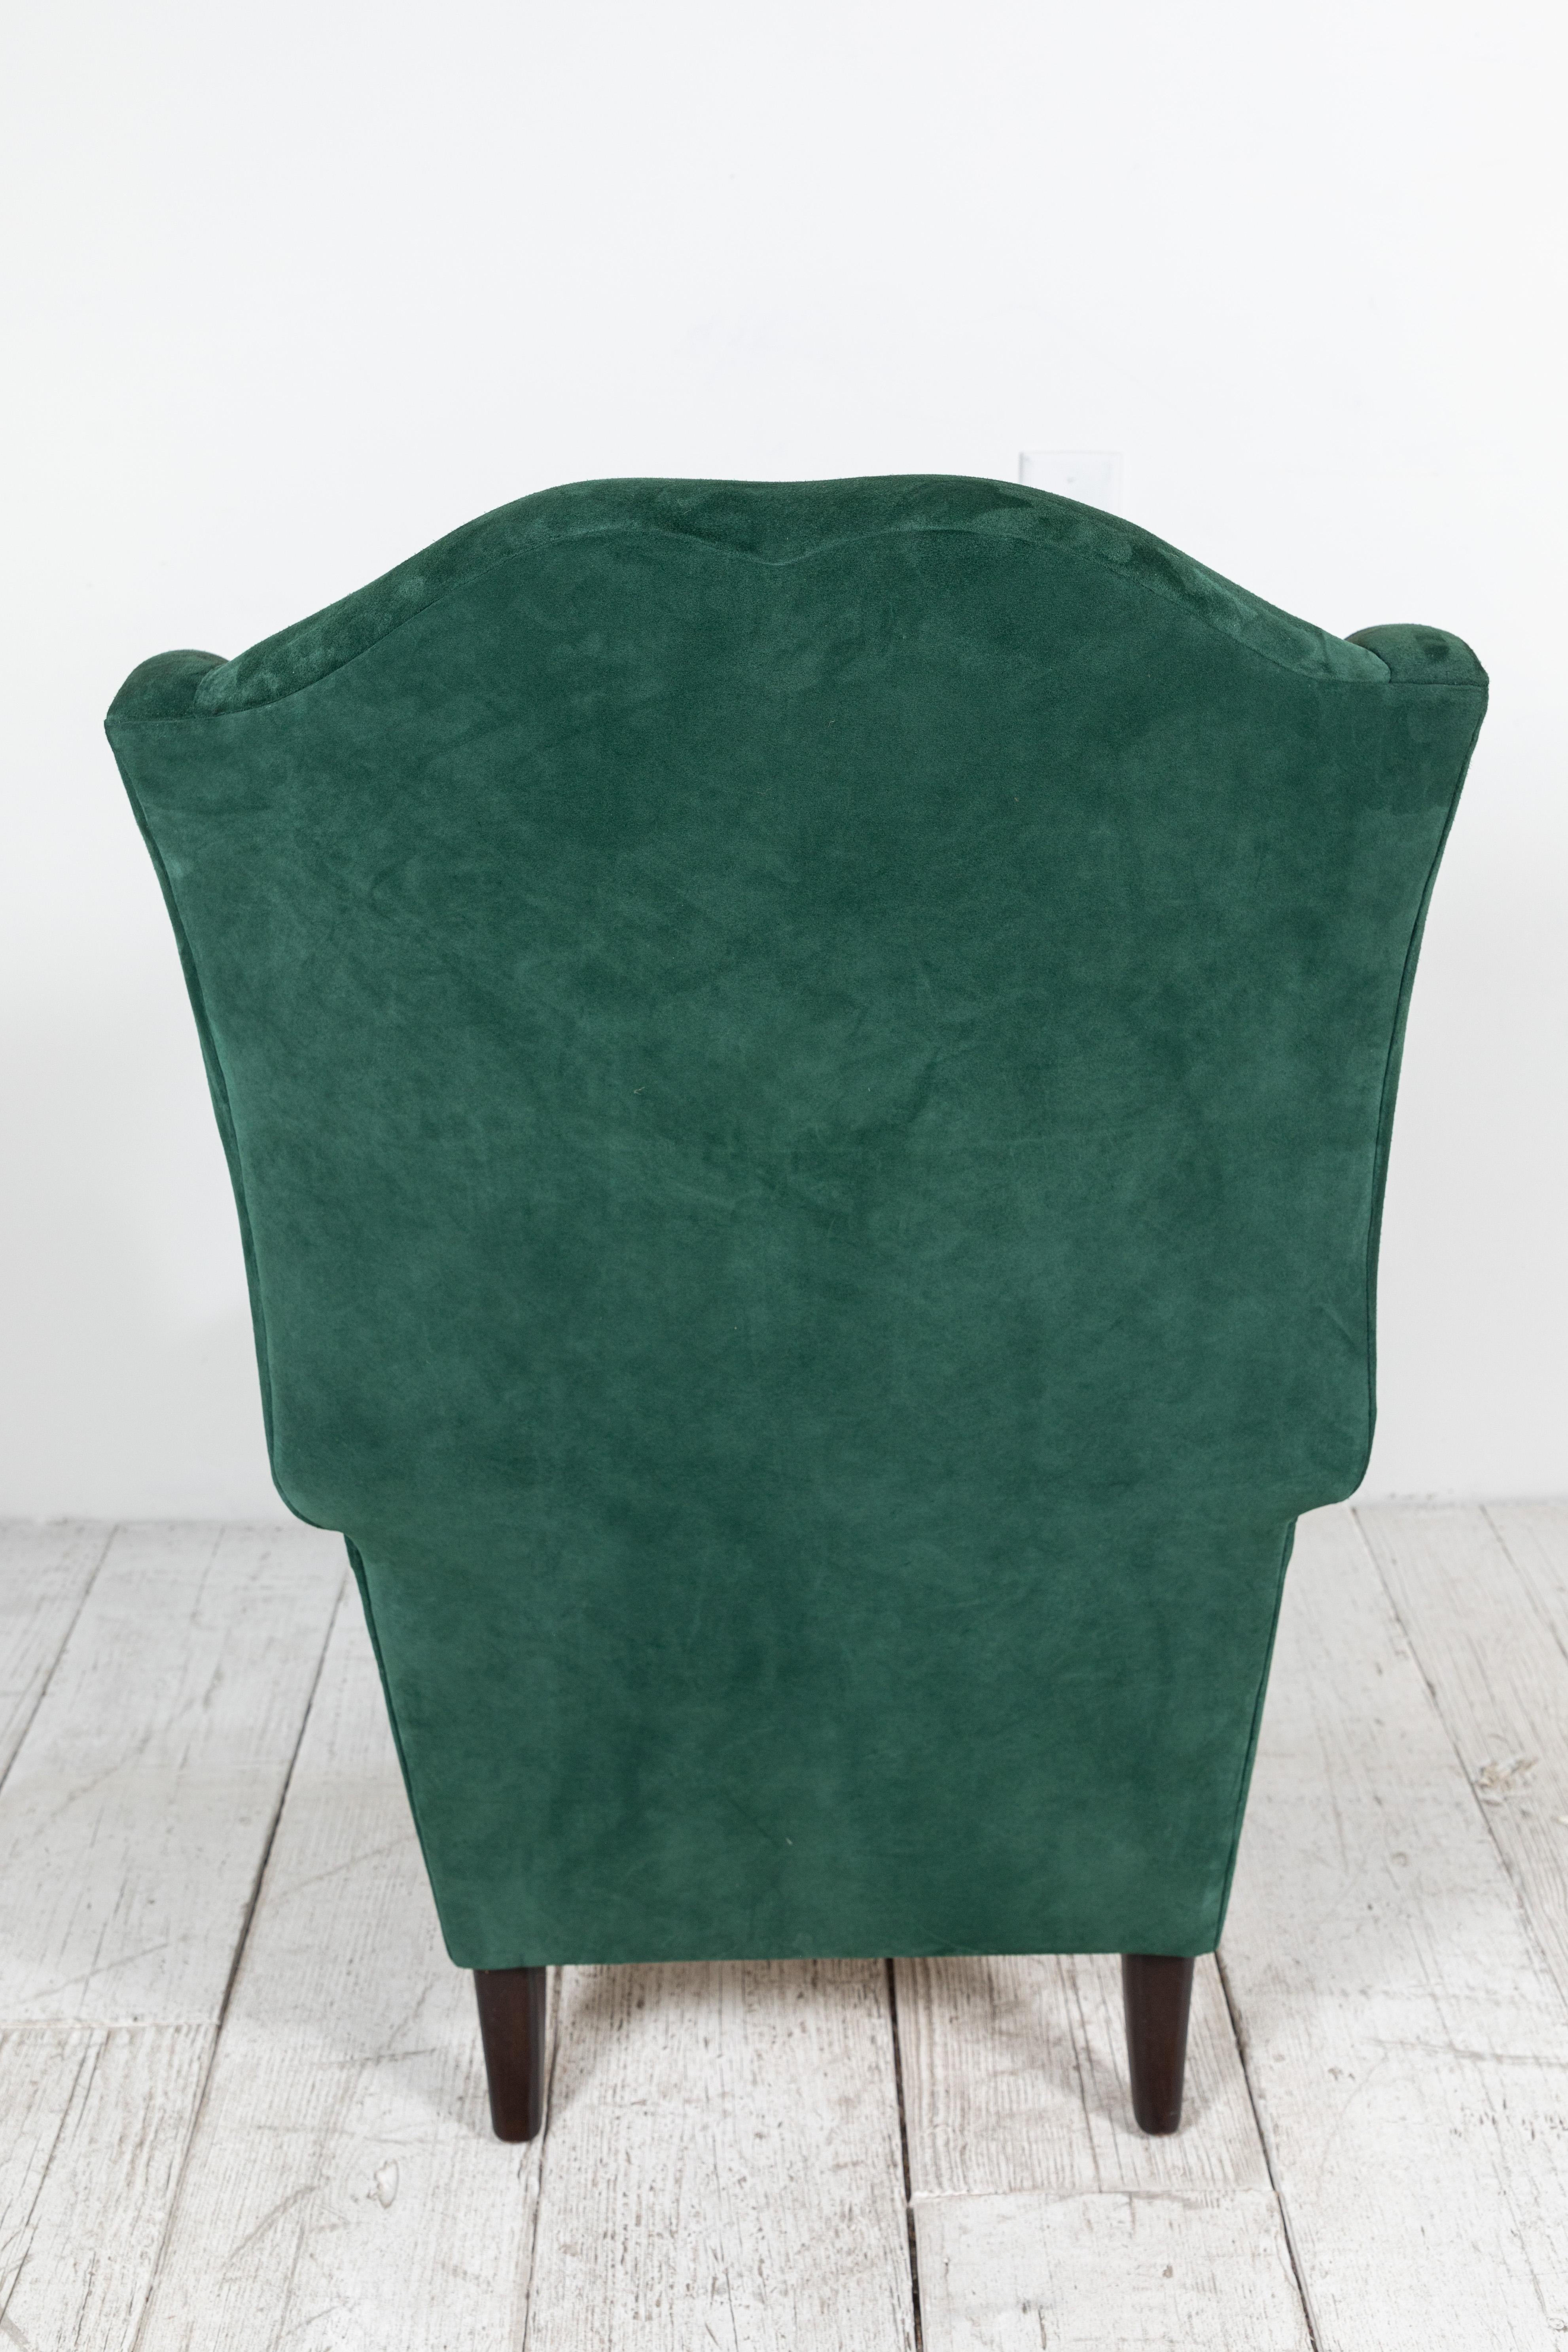 North American Nickey Kehoe Wingback Chair Upholstered in Green Suede